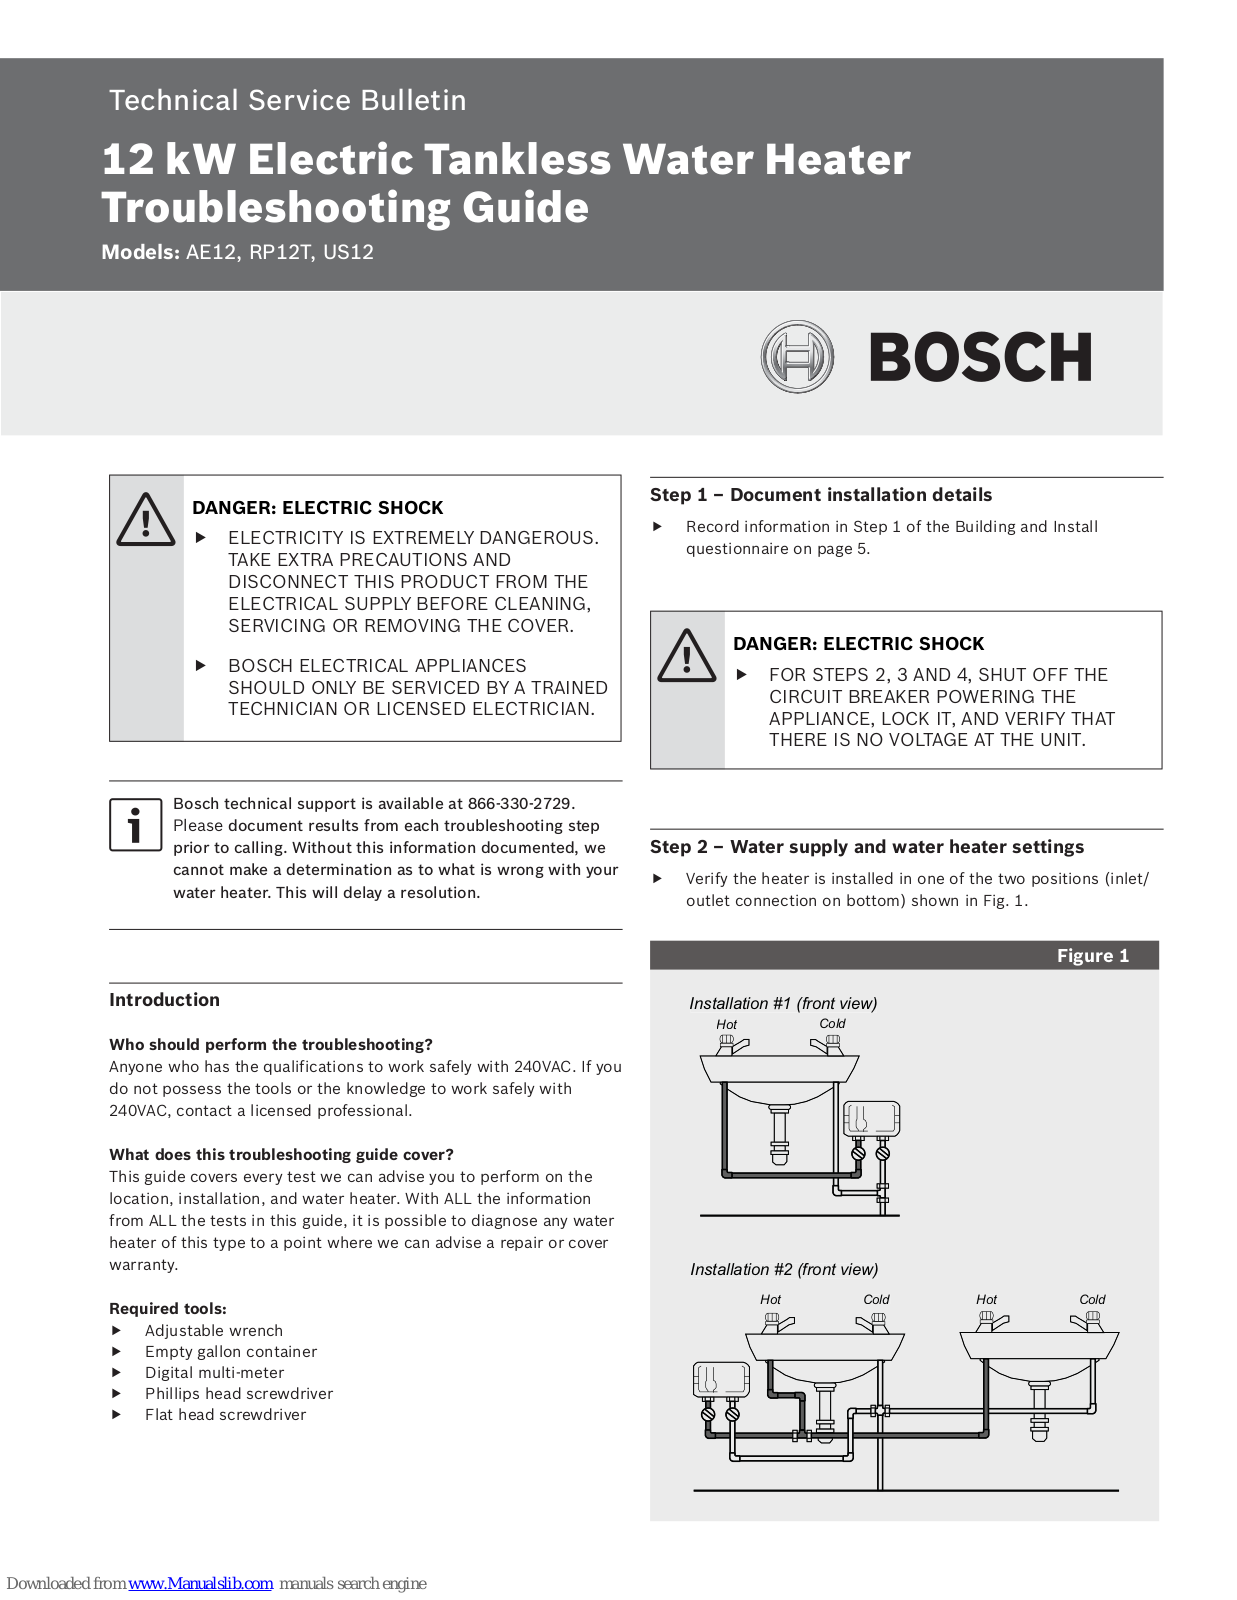 Bosch AE12, US12, RP12T Troubleshooting Manual